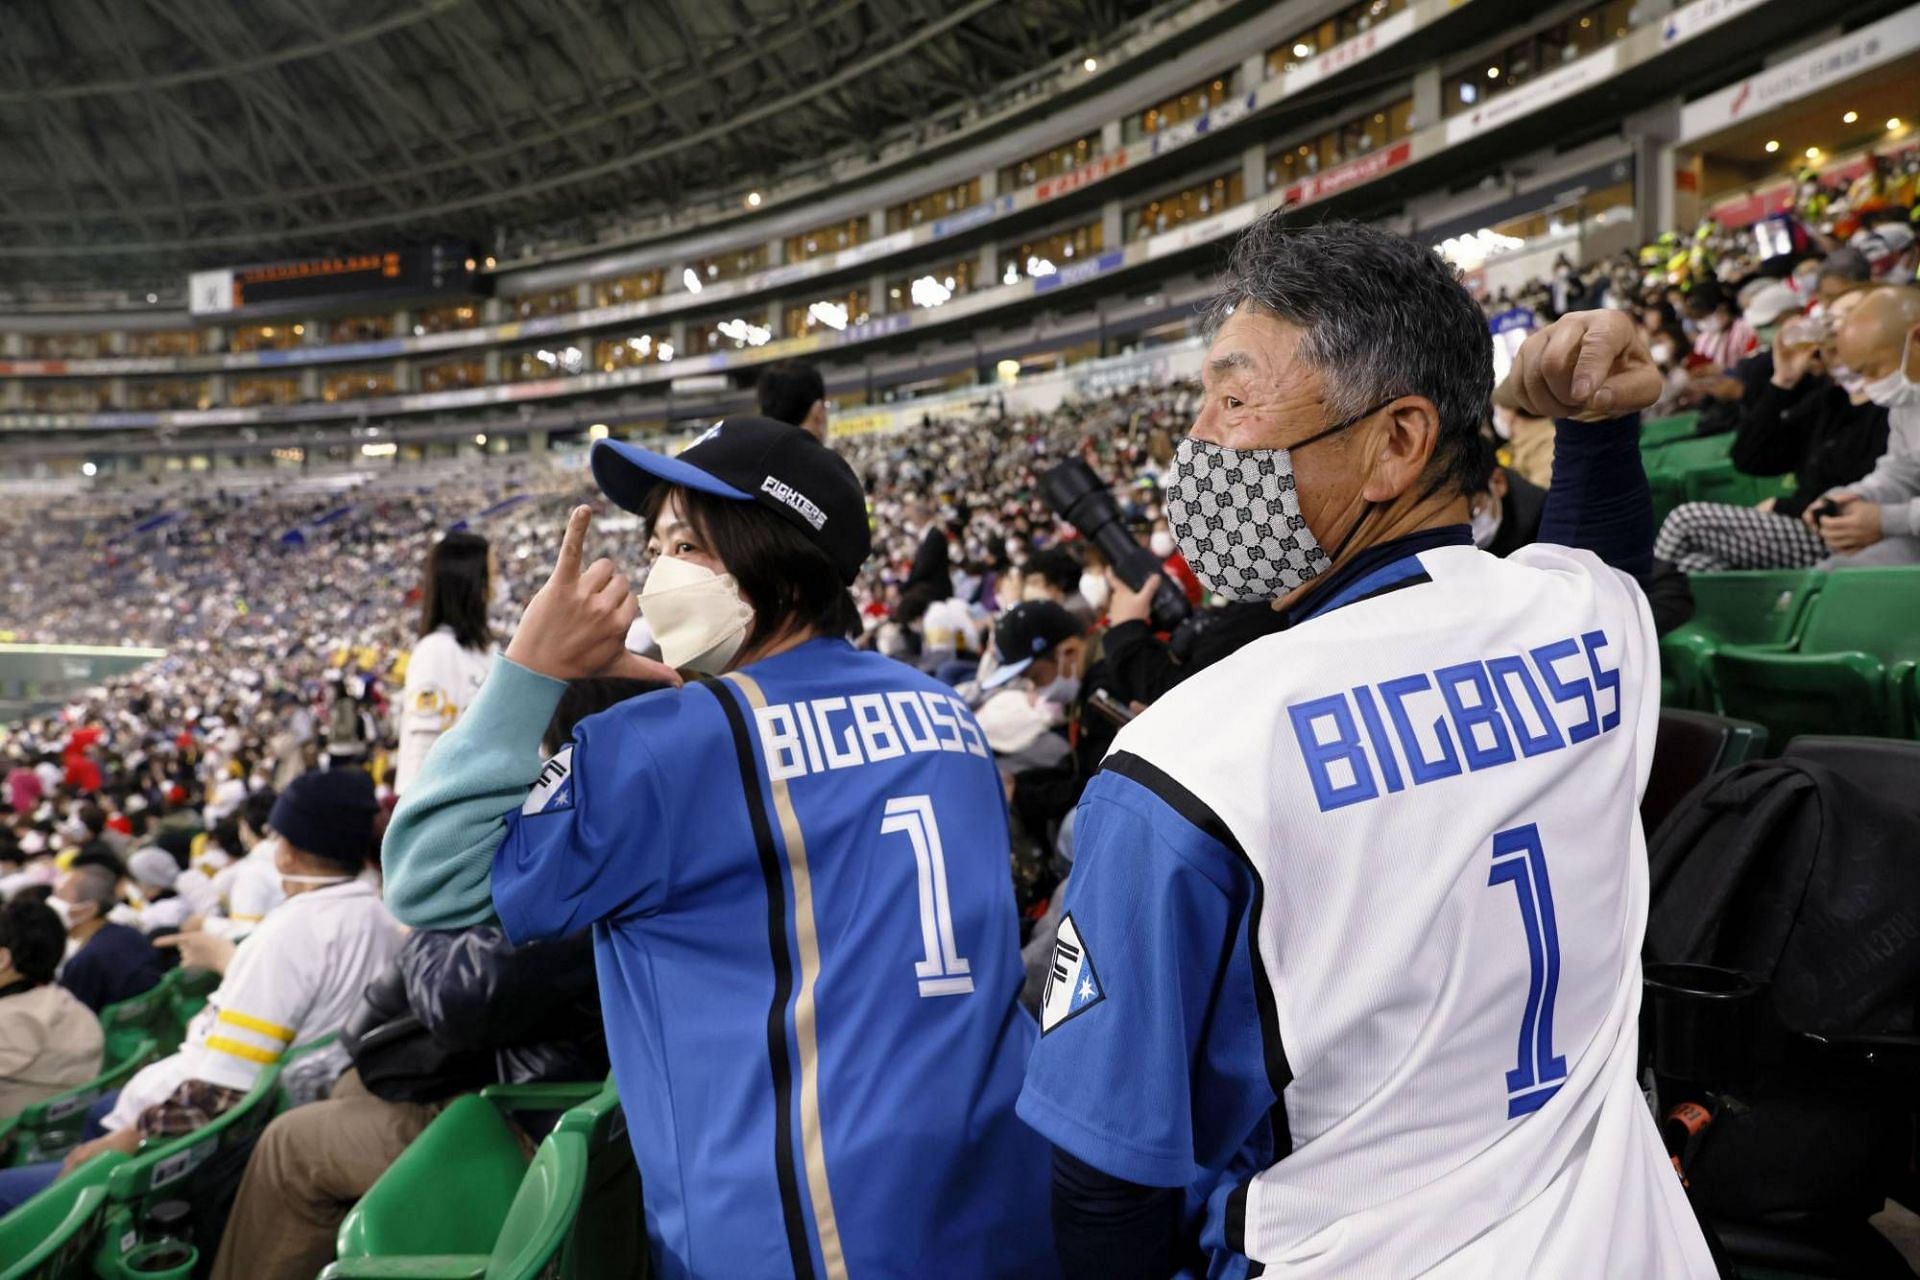 Nippon-Ham fans donning the BIGBOSS jersey (Image from Kyodo)